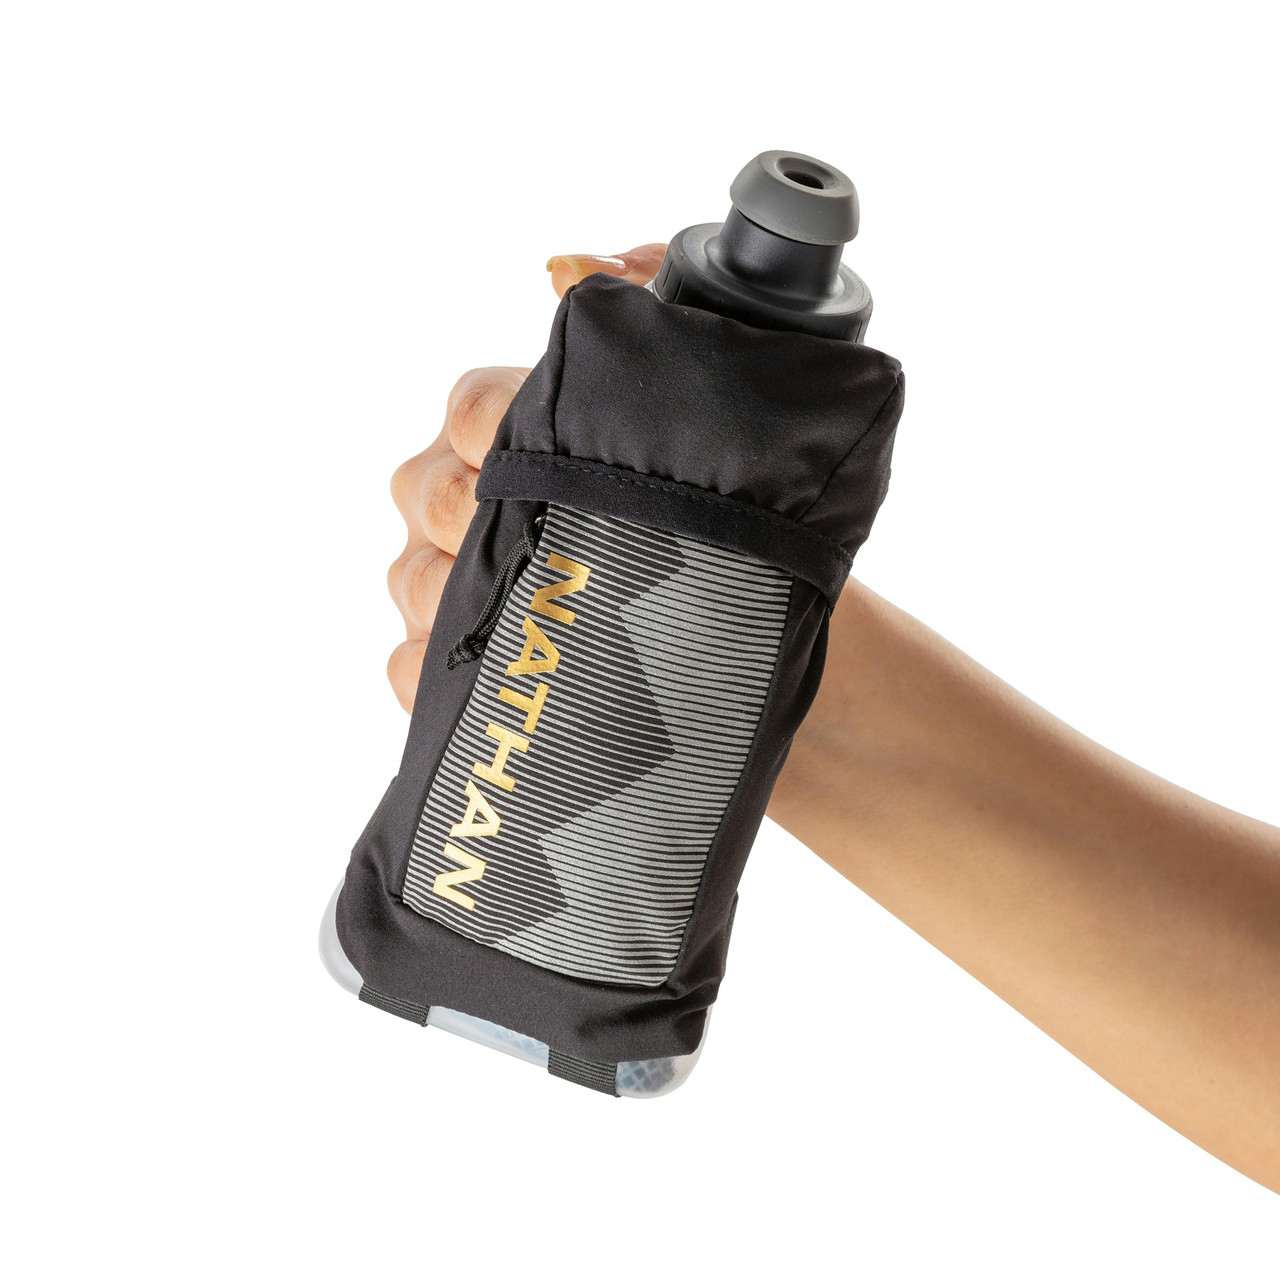 Quick Squeeze Insulated Handheld Bottle 12 oz. Black/Gold